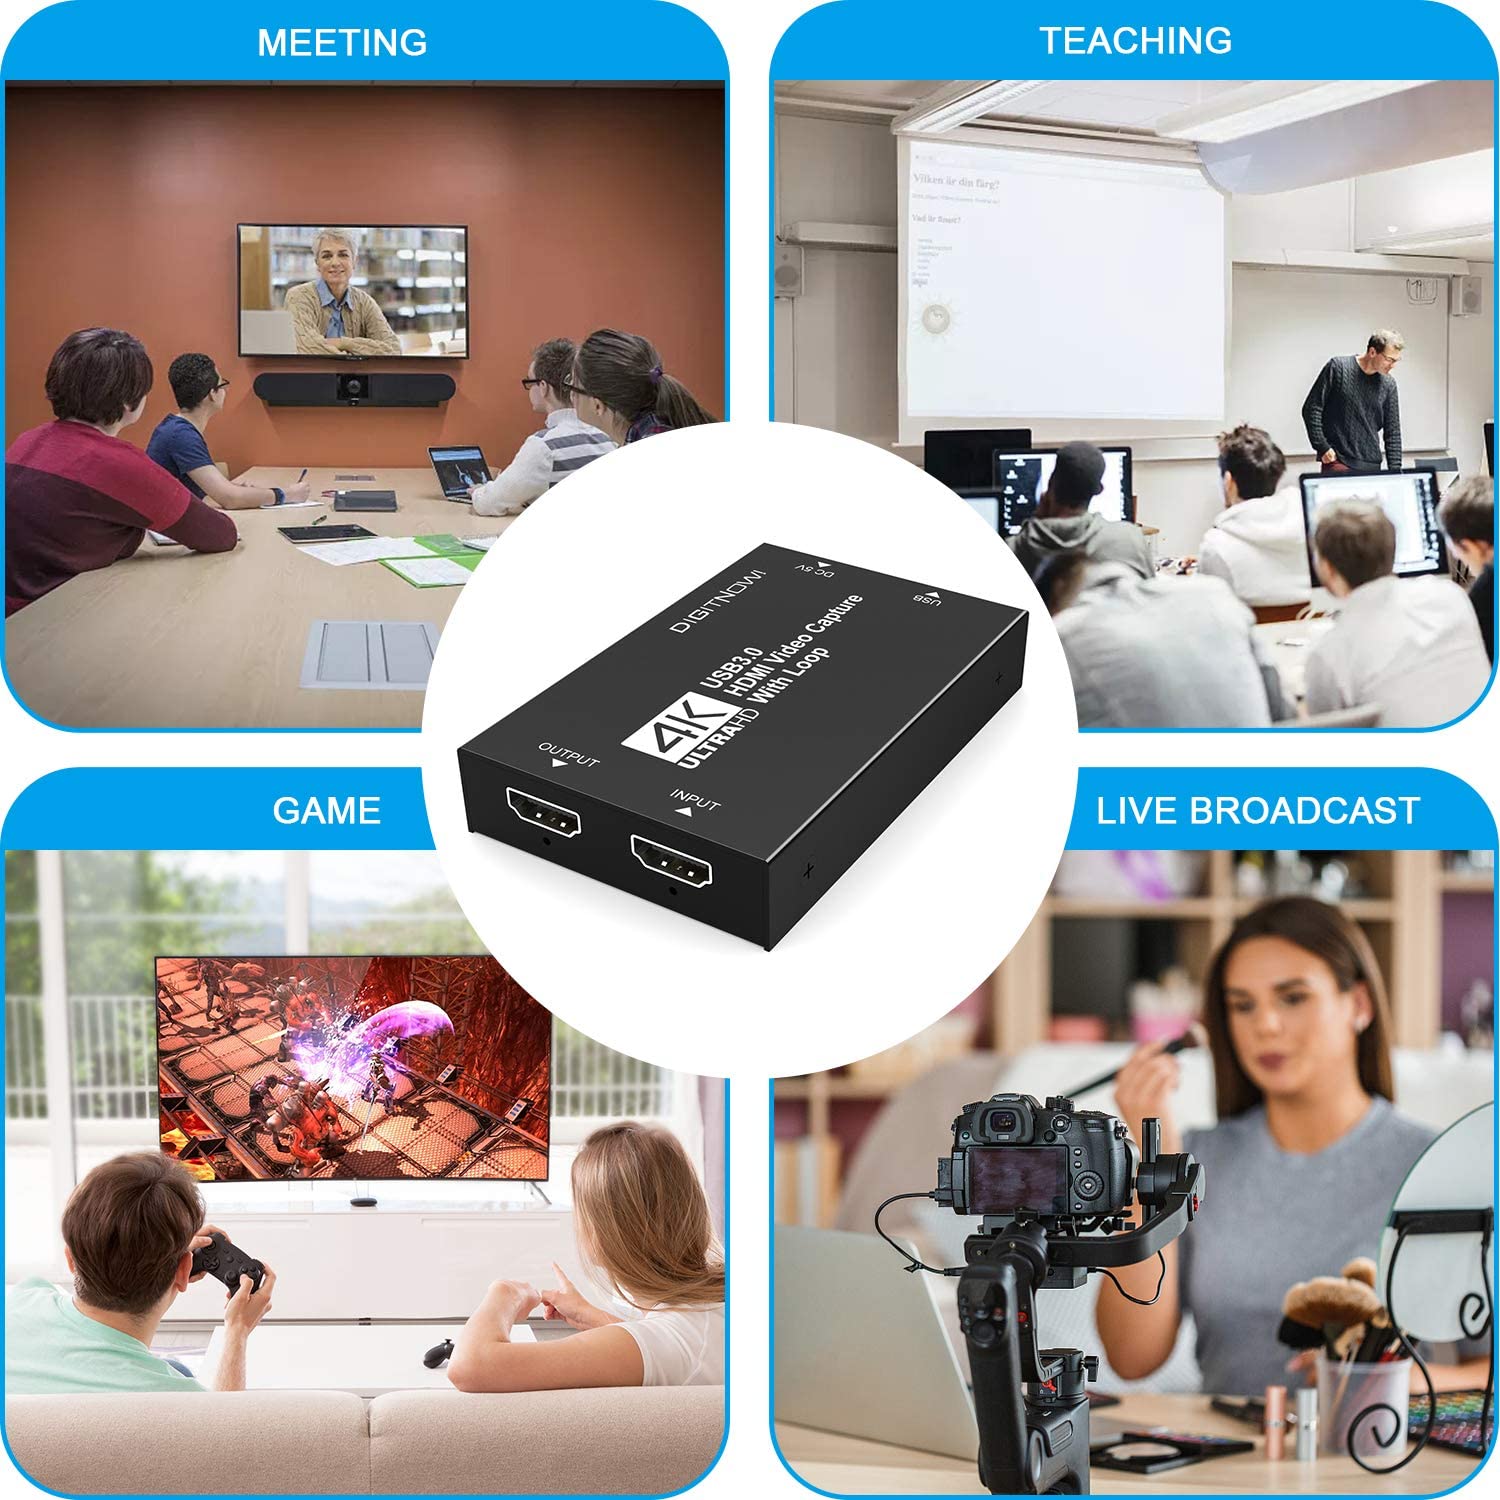 DIGITNOW 4K Video Capture Card with Loop Out, HDMI USB 3.0 Video Captu